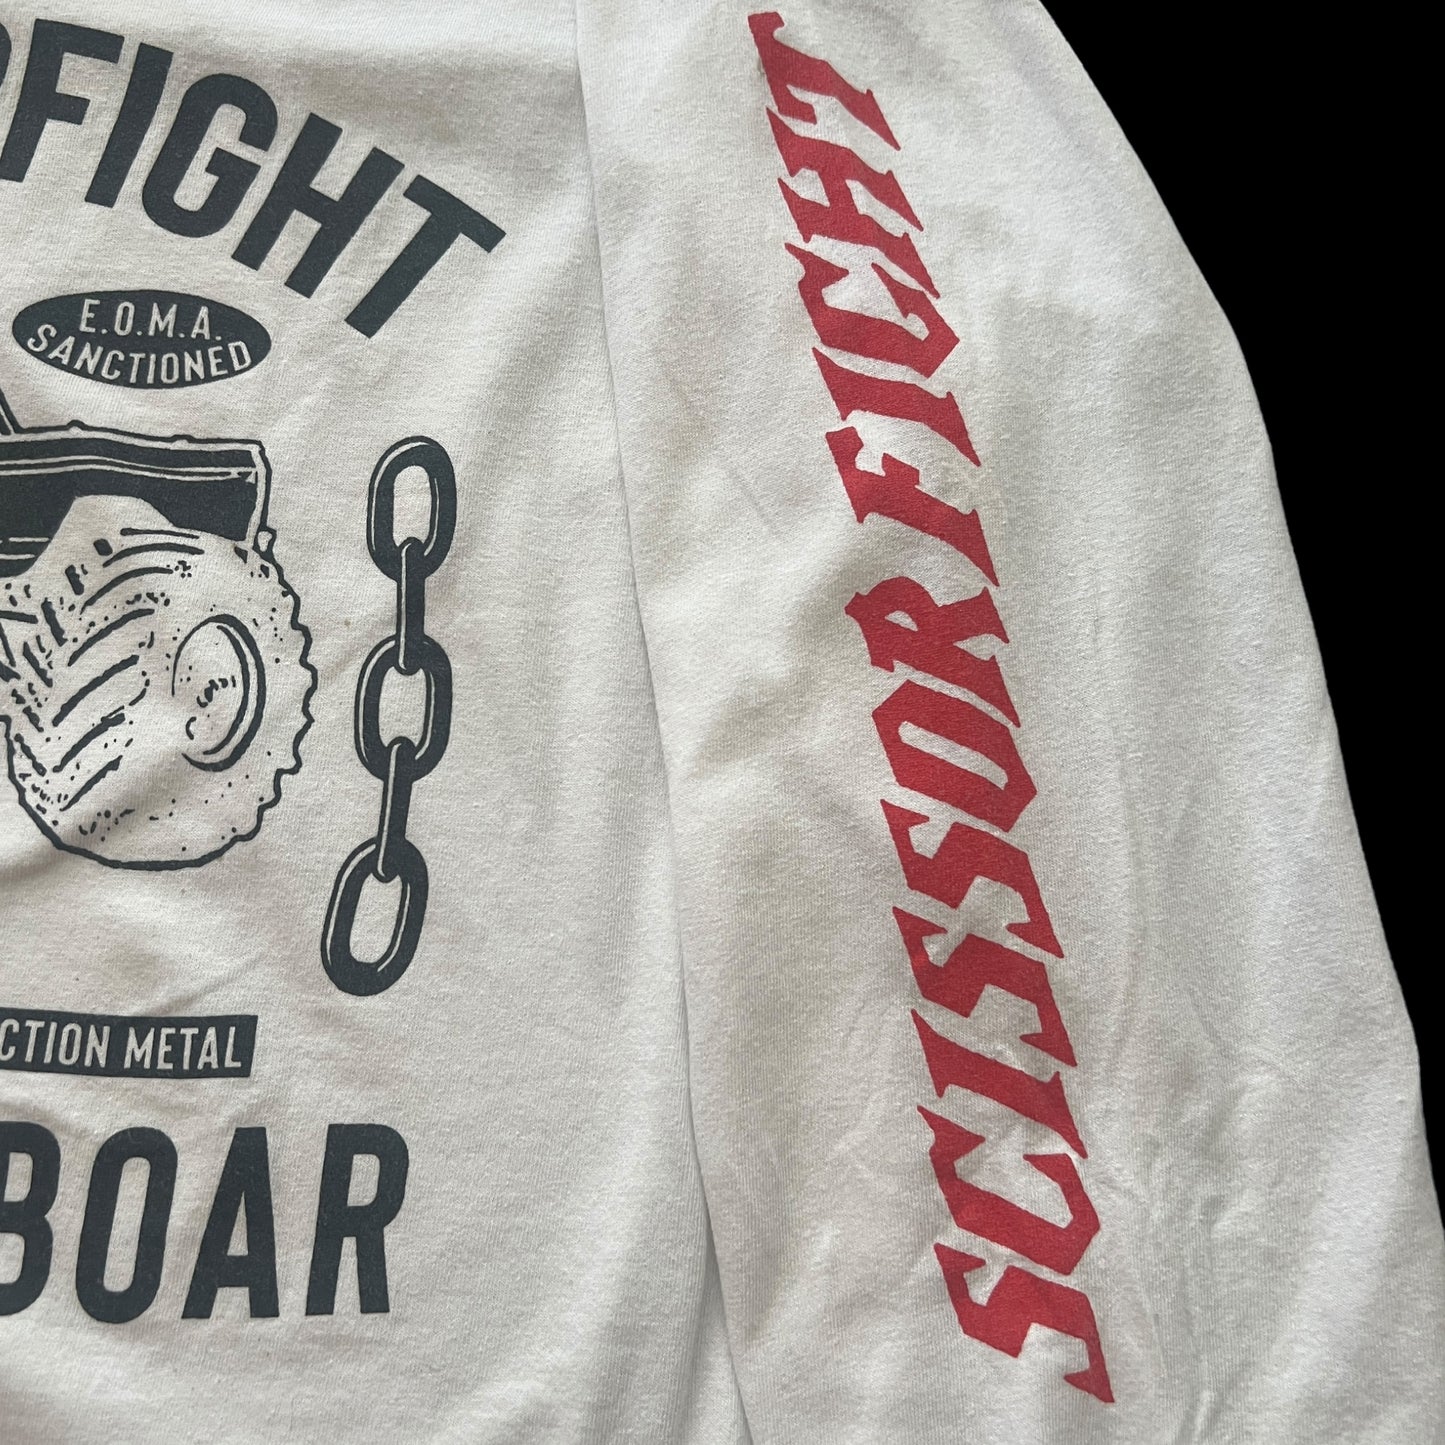 Scissorfight Band Raised By Boar Long Sleeve T-Shirt Size Large